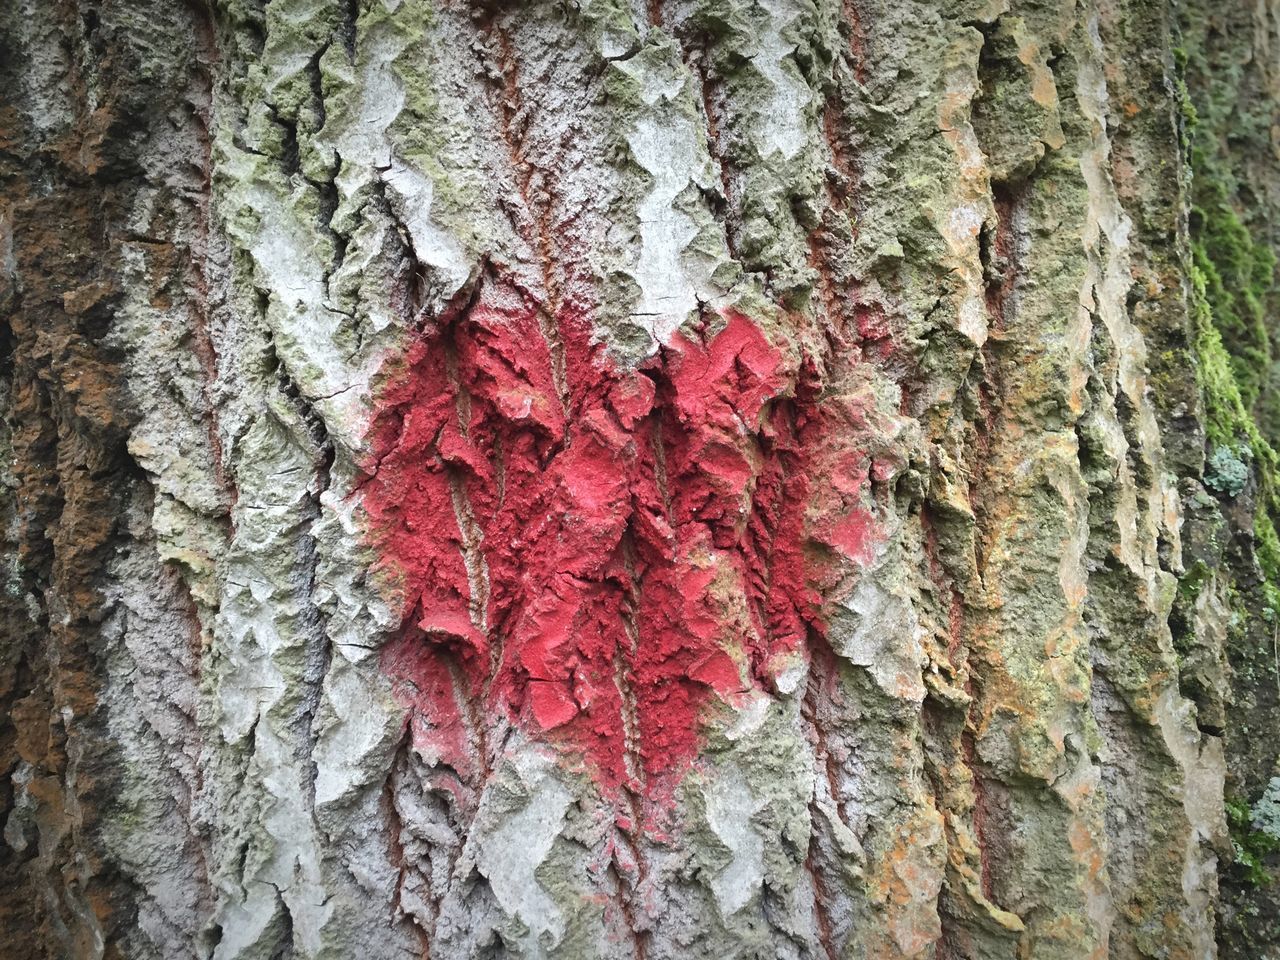 tree trunk, tree, textured, red, bark, rough, growth, close-up, nature, moss, full frame, plant bark, day, forest, beauty in nature, outdoors, natural pattern, wood - material, backgrounds, no people